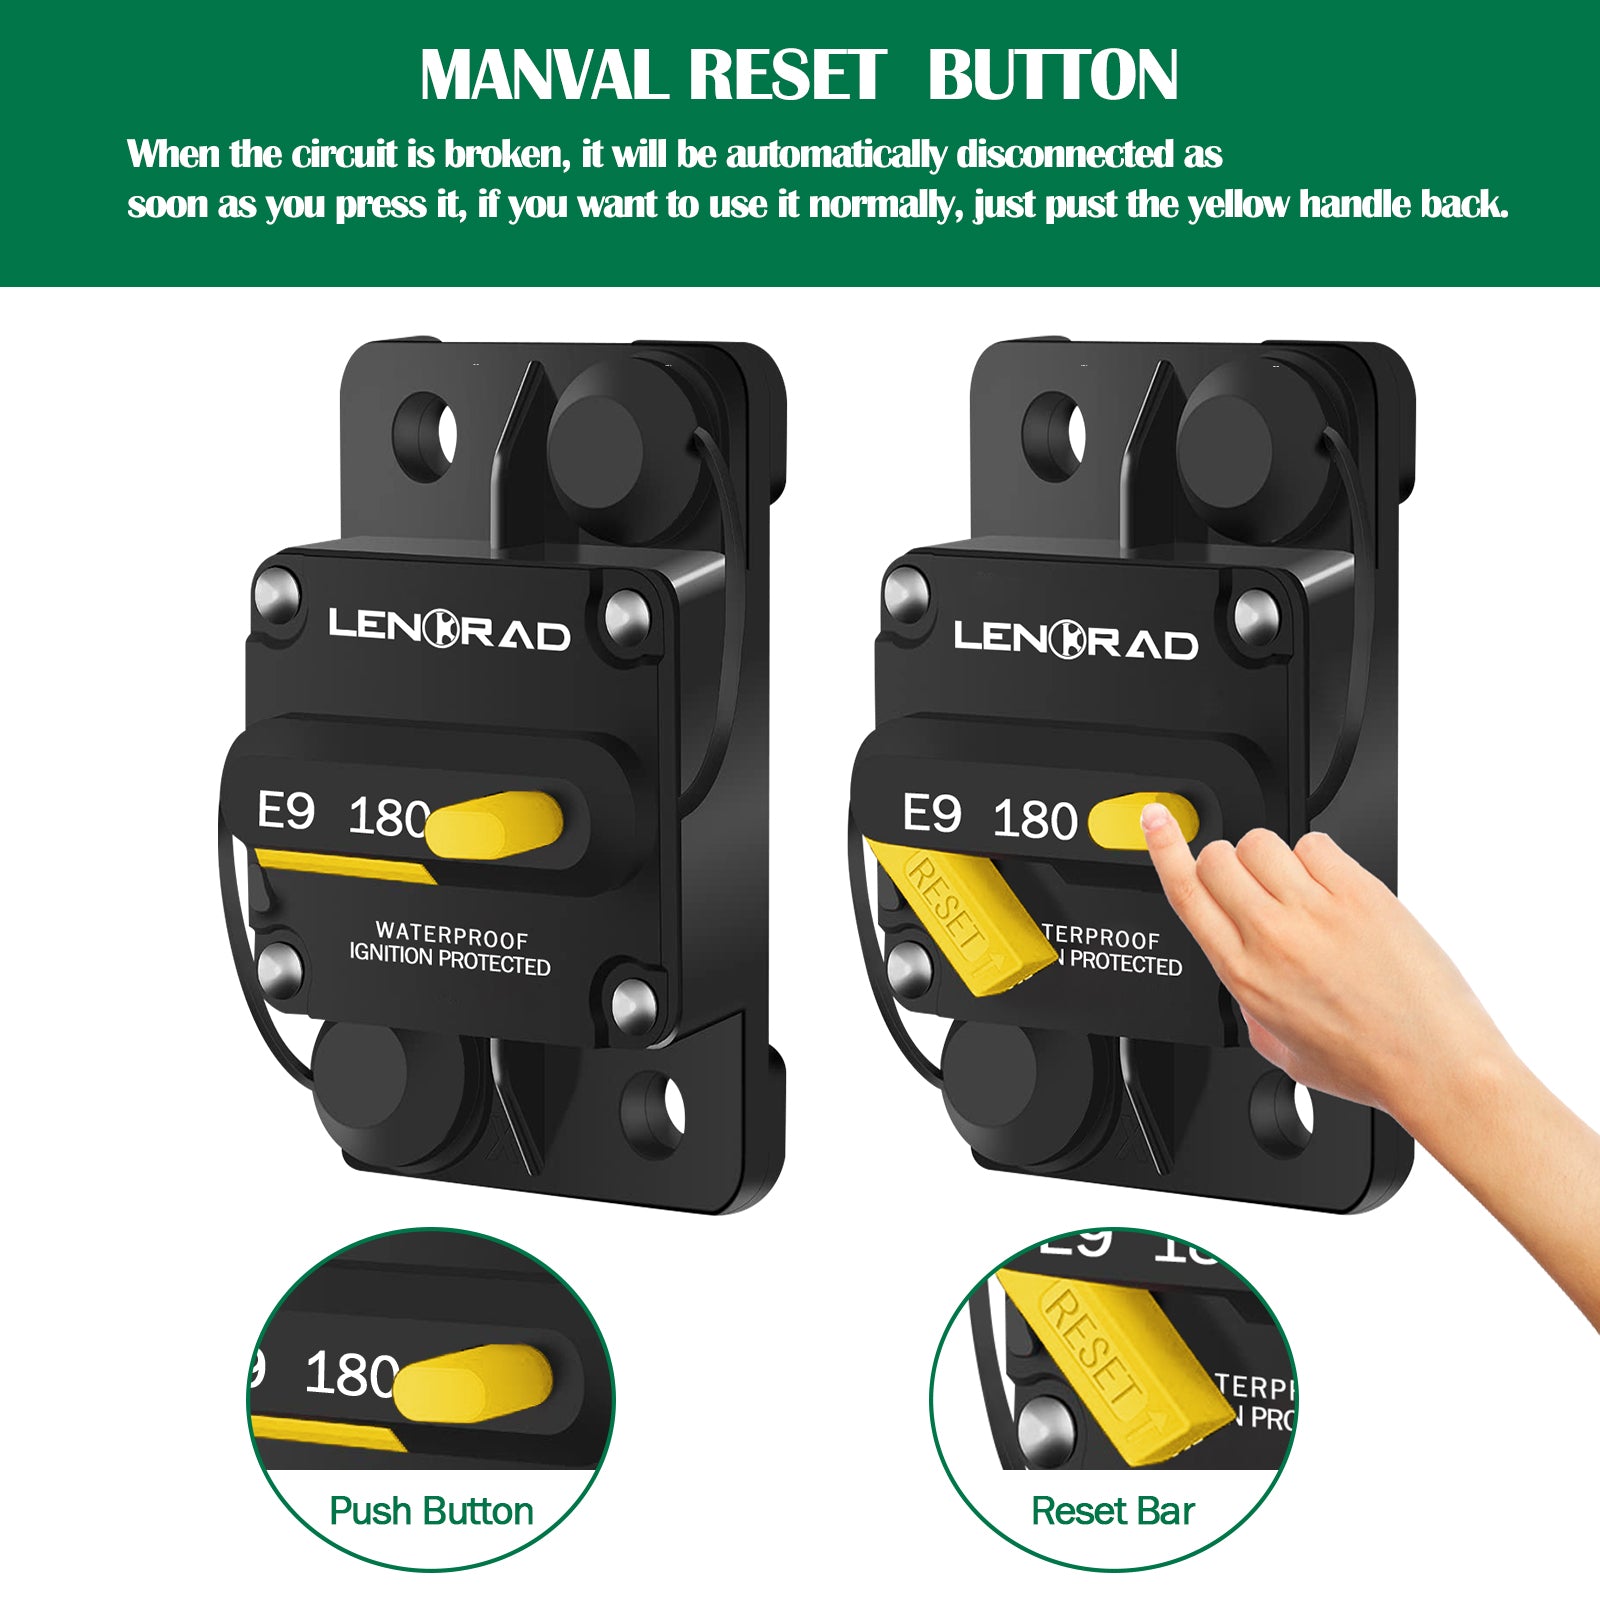 LENKRAD 180 Amp Circuit Breaker 12V with Manual Reset Switch Button for  Boat Marine RV Yacht, Boat Circuit Breakers 12V - 48V DC,  Waterproof(Surface